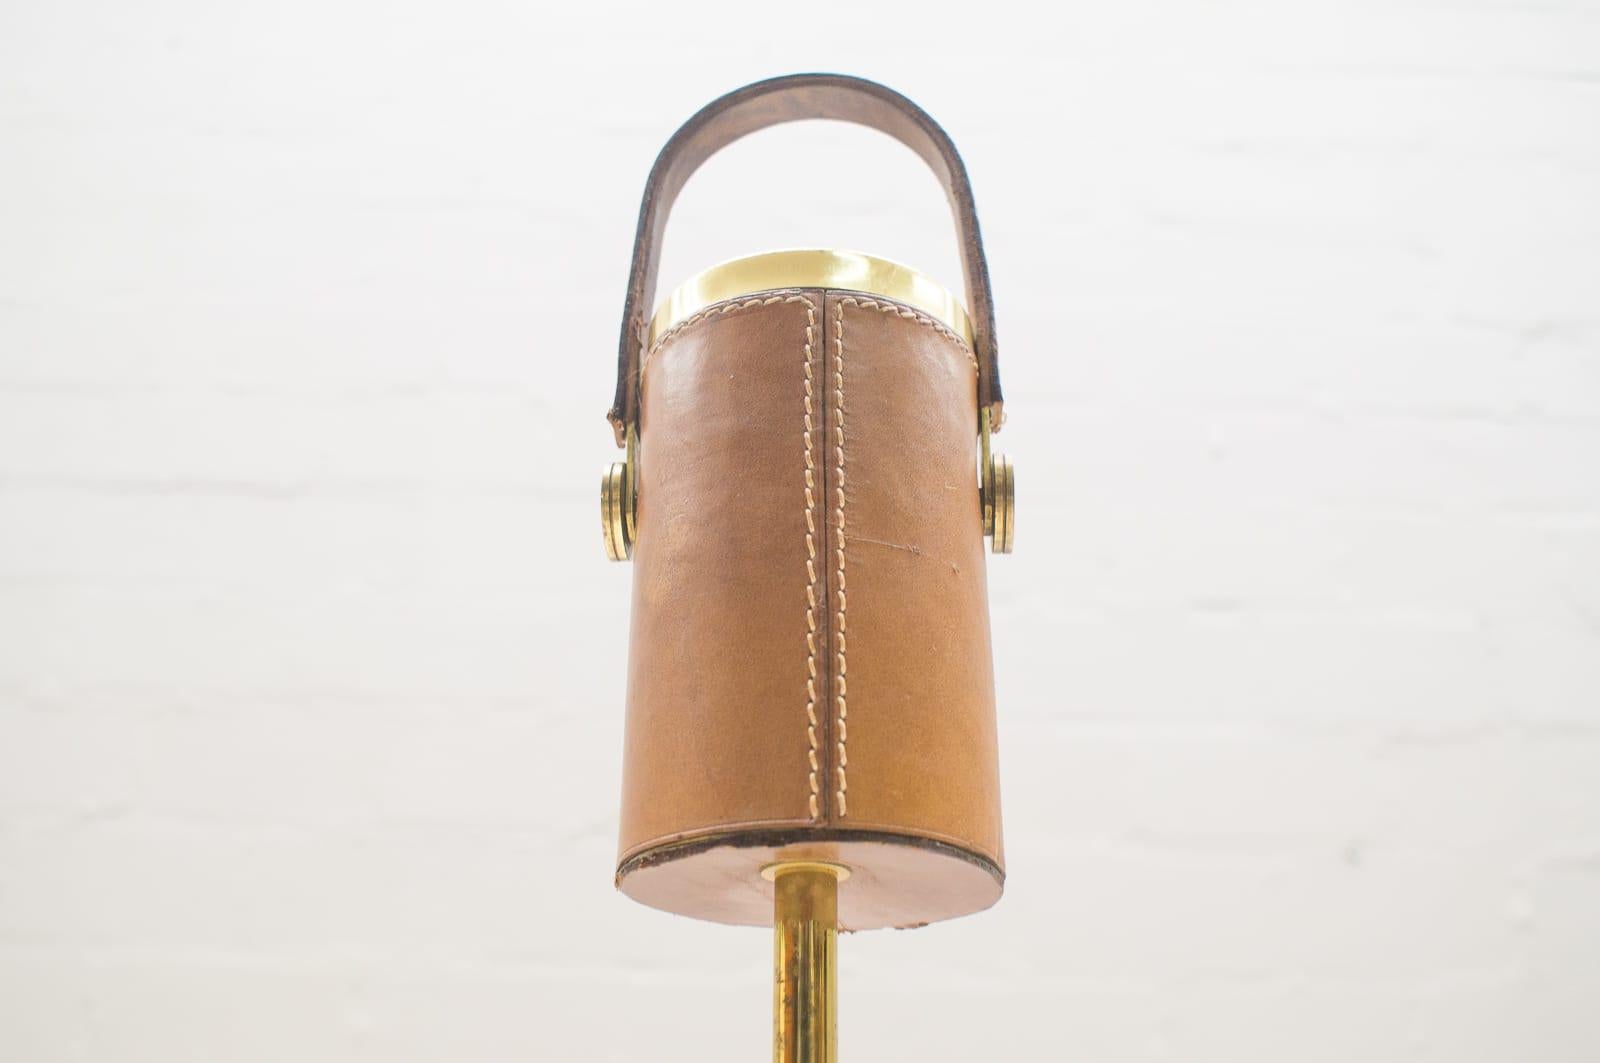 French Portable Ashtray Stand in the Manner of Jacques Adnet, Brass and Leather, 1950s